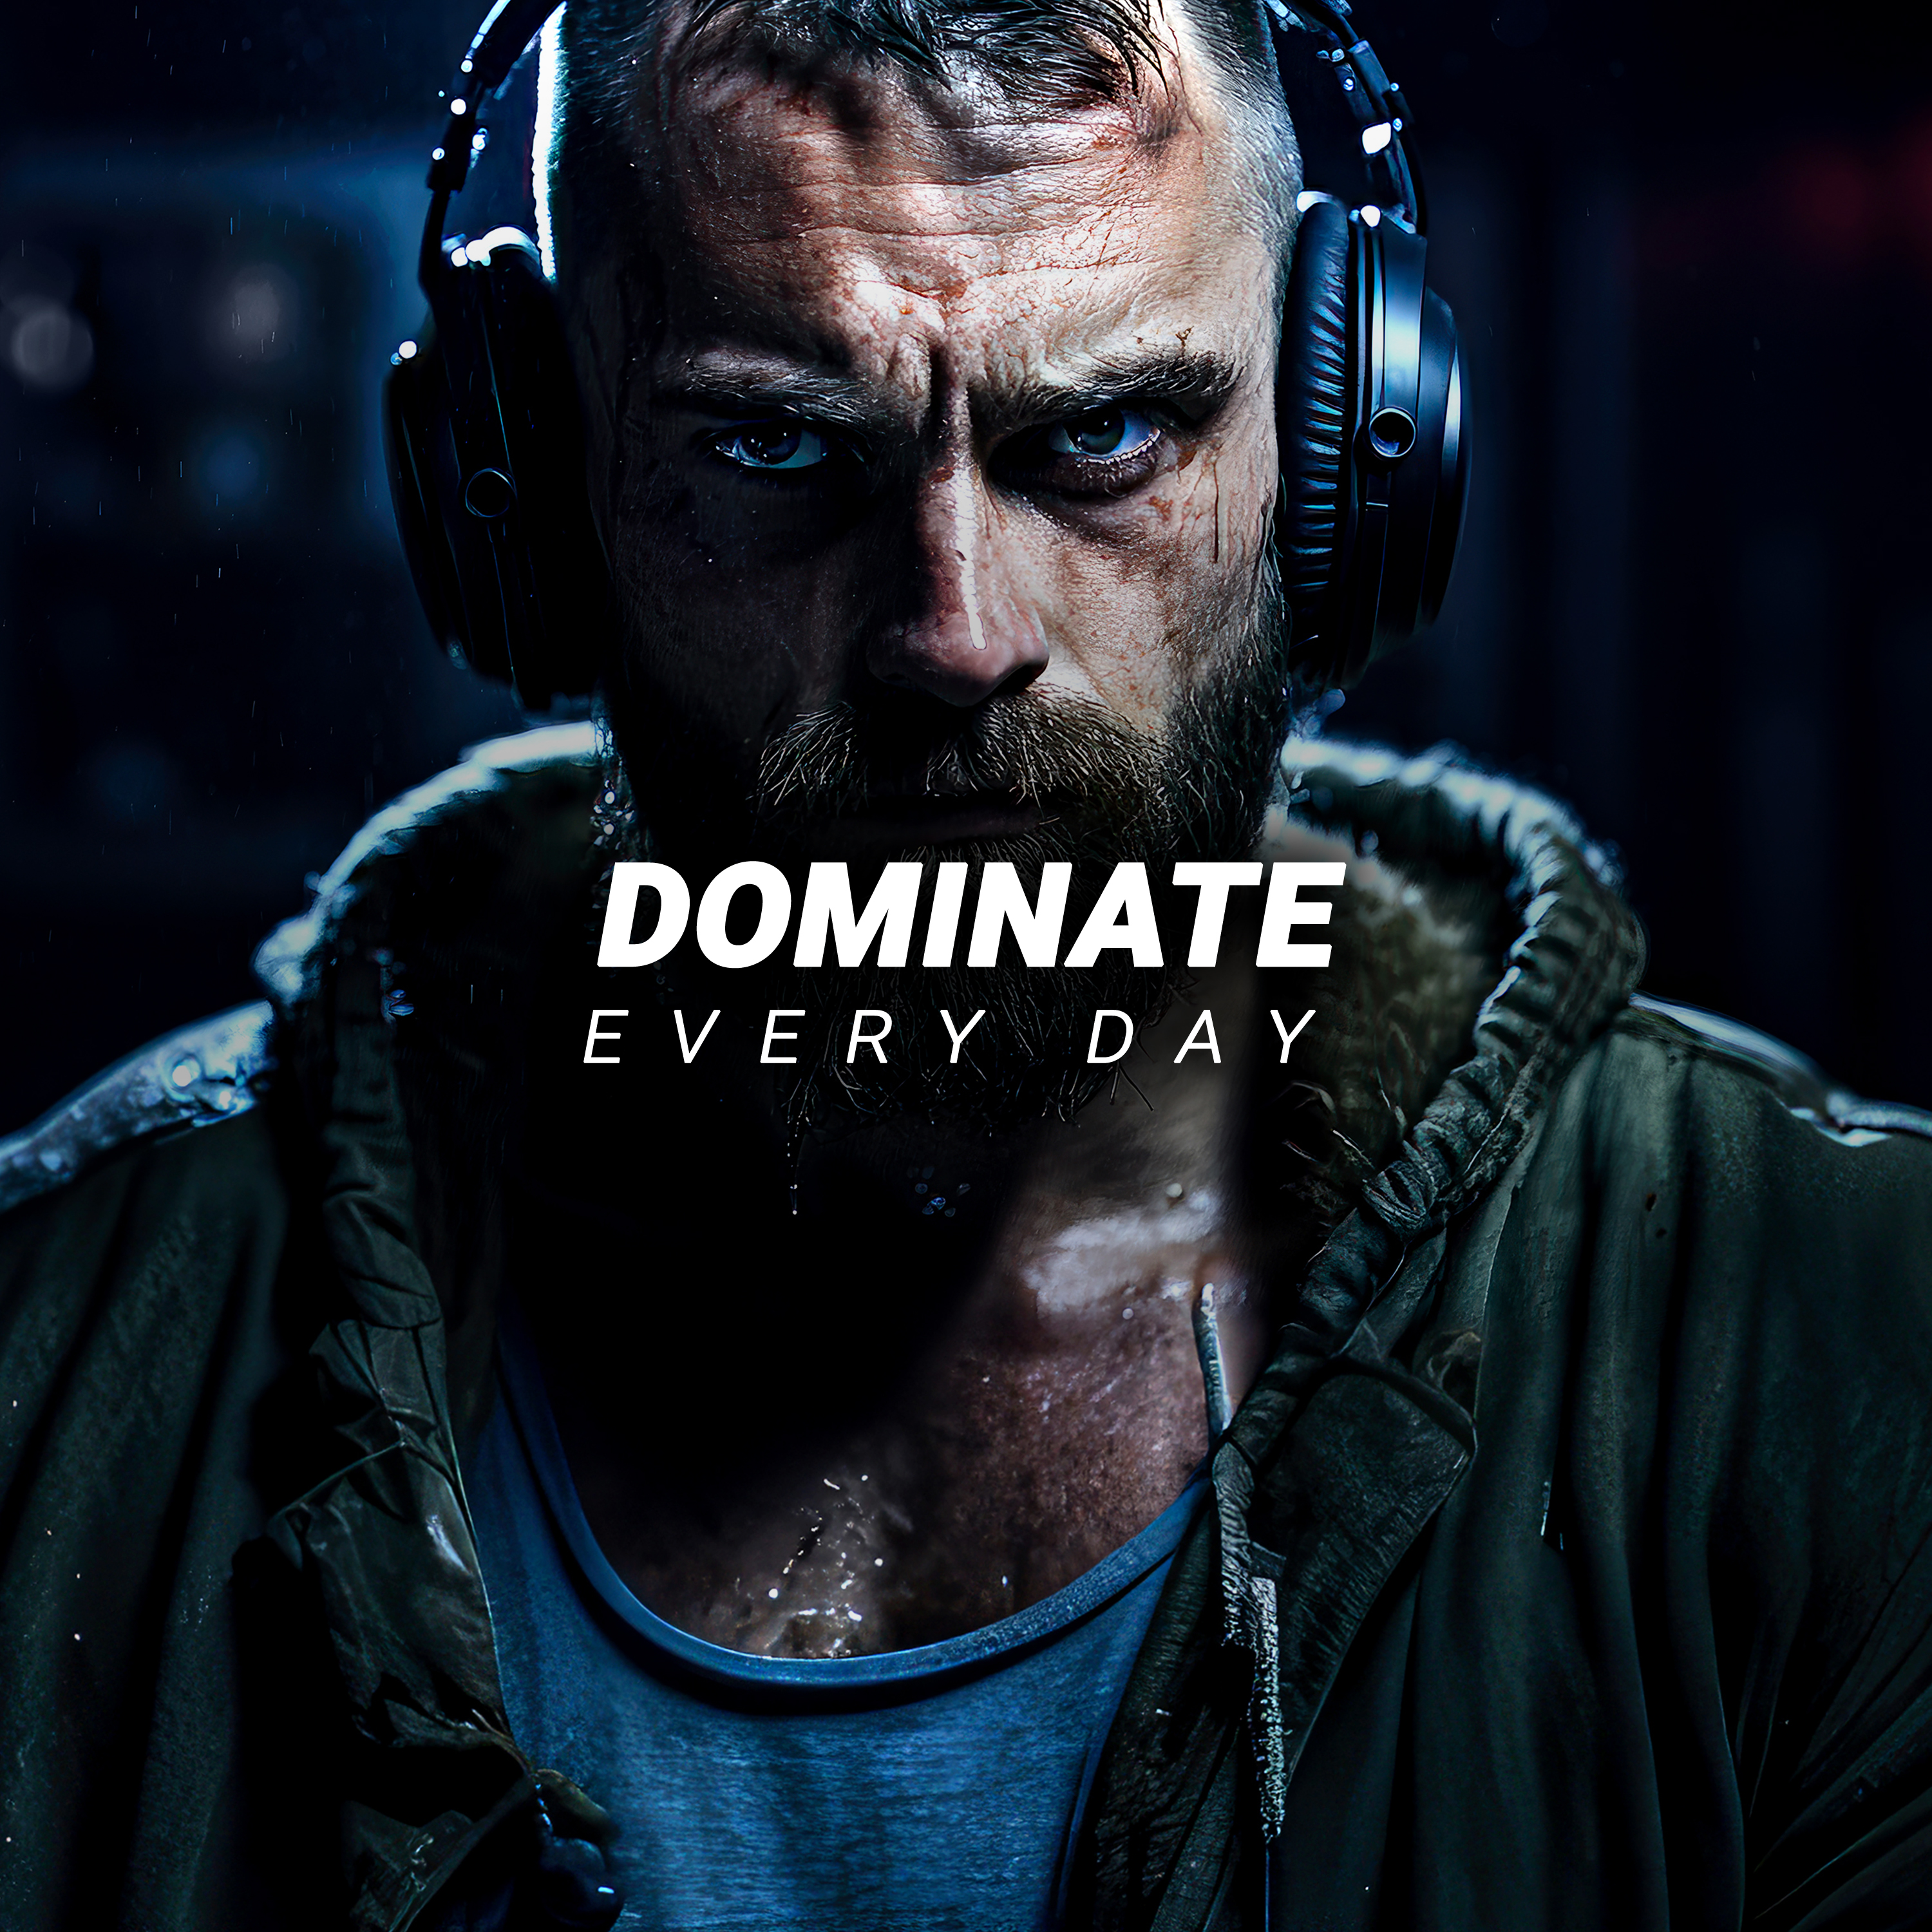 DOMINATE EVERY DAY